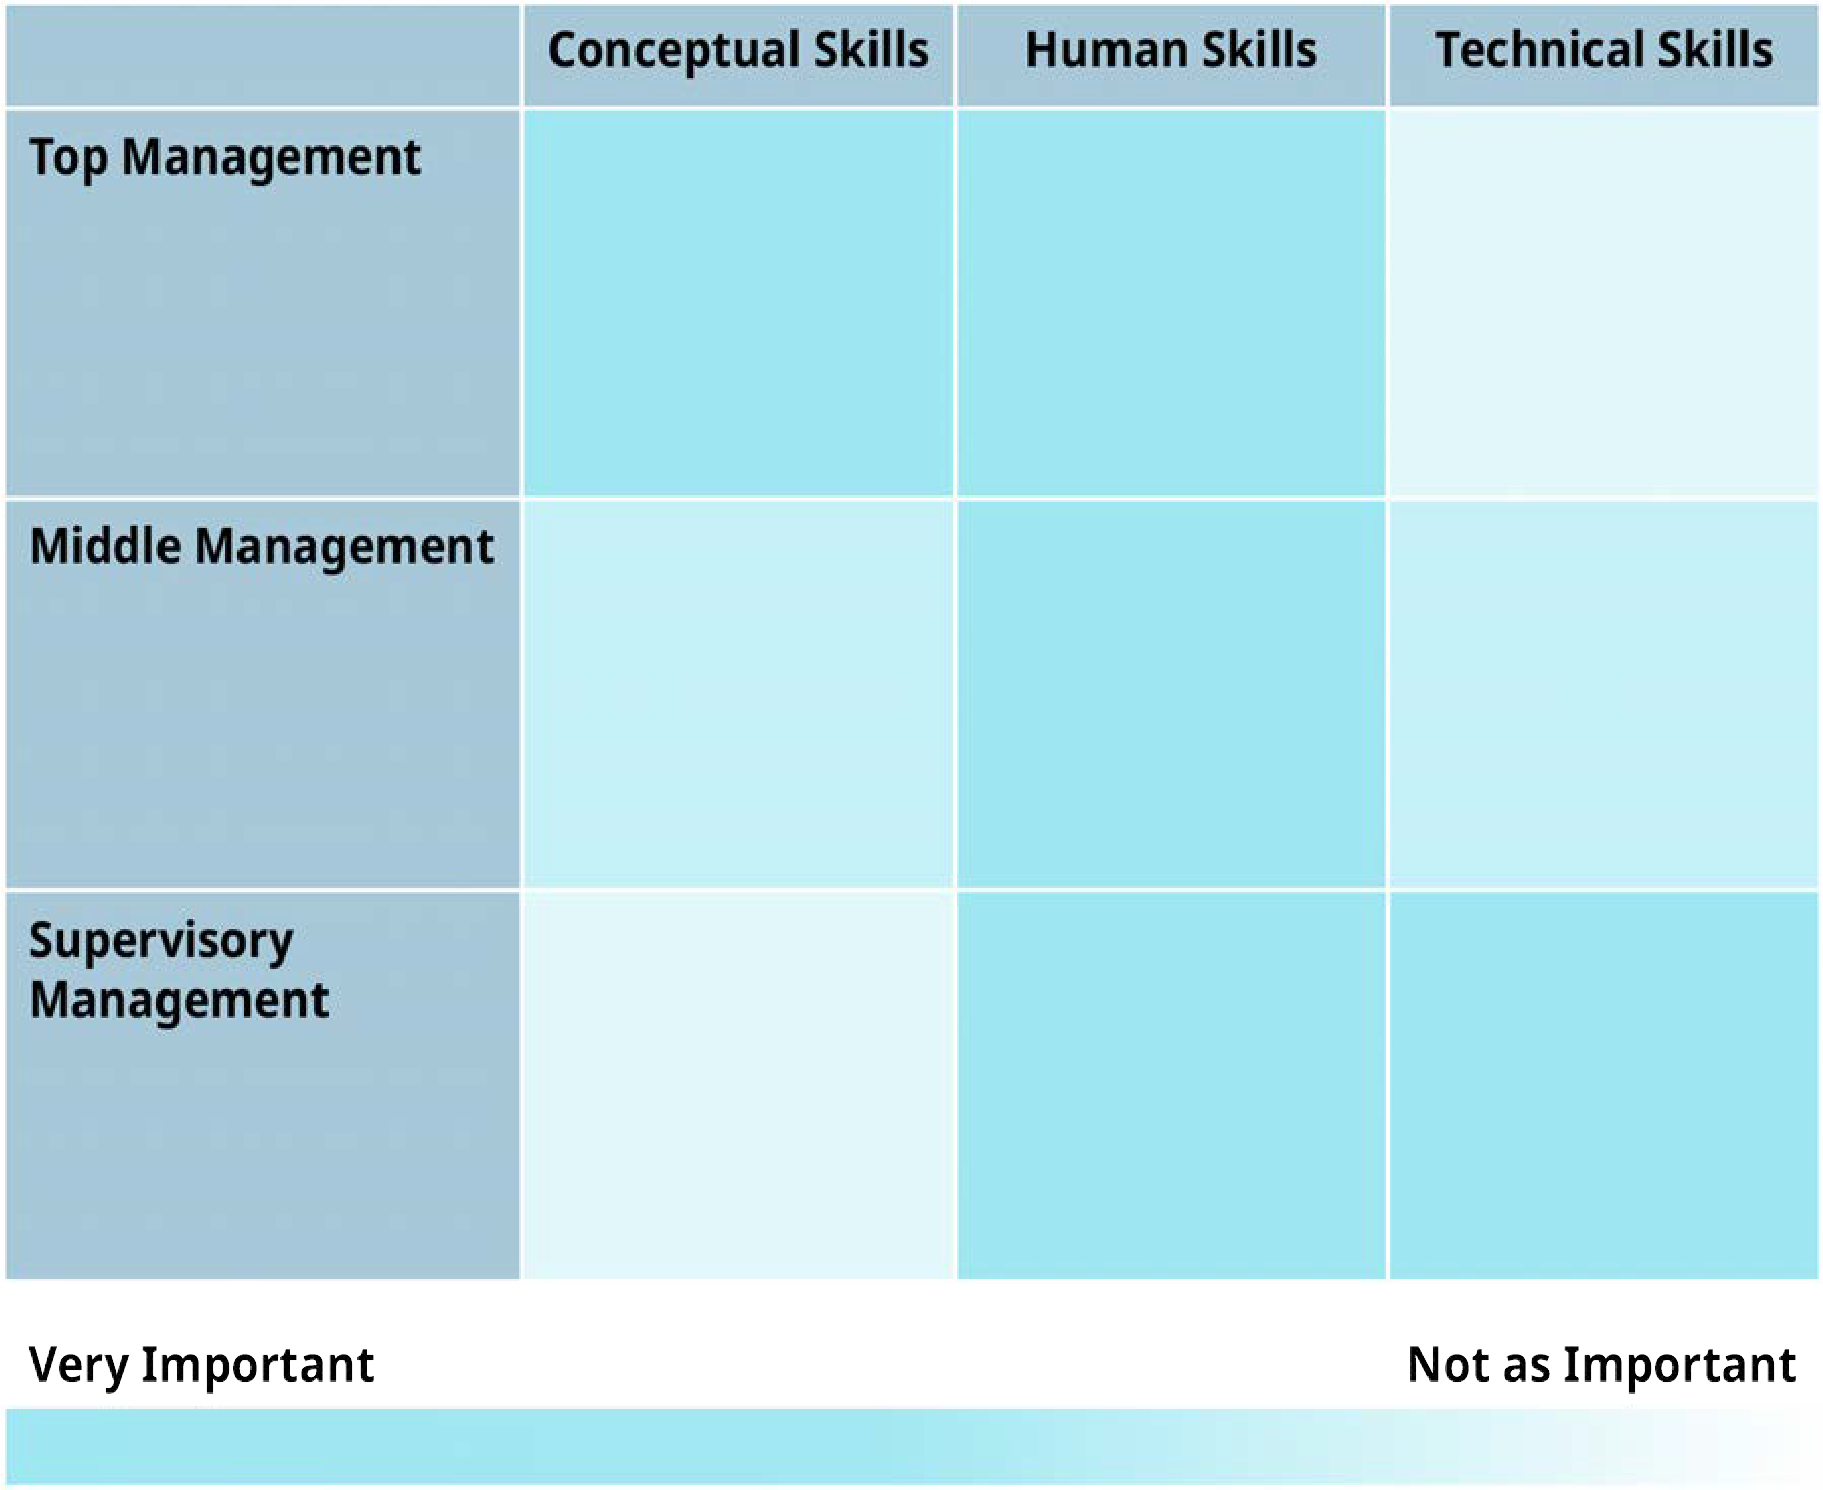 Exhibit 6.8 The Importance of Managerial Skills at Different Management Levels (Attribution: Copyright Rice University, OpenStax, under CC BY 4.0 license.)